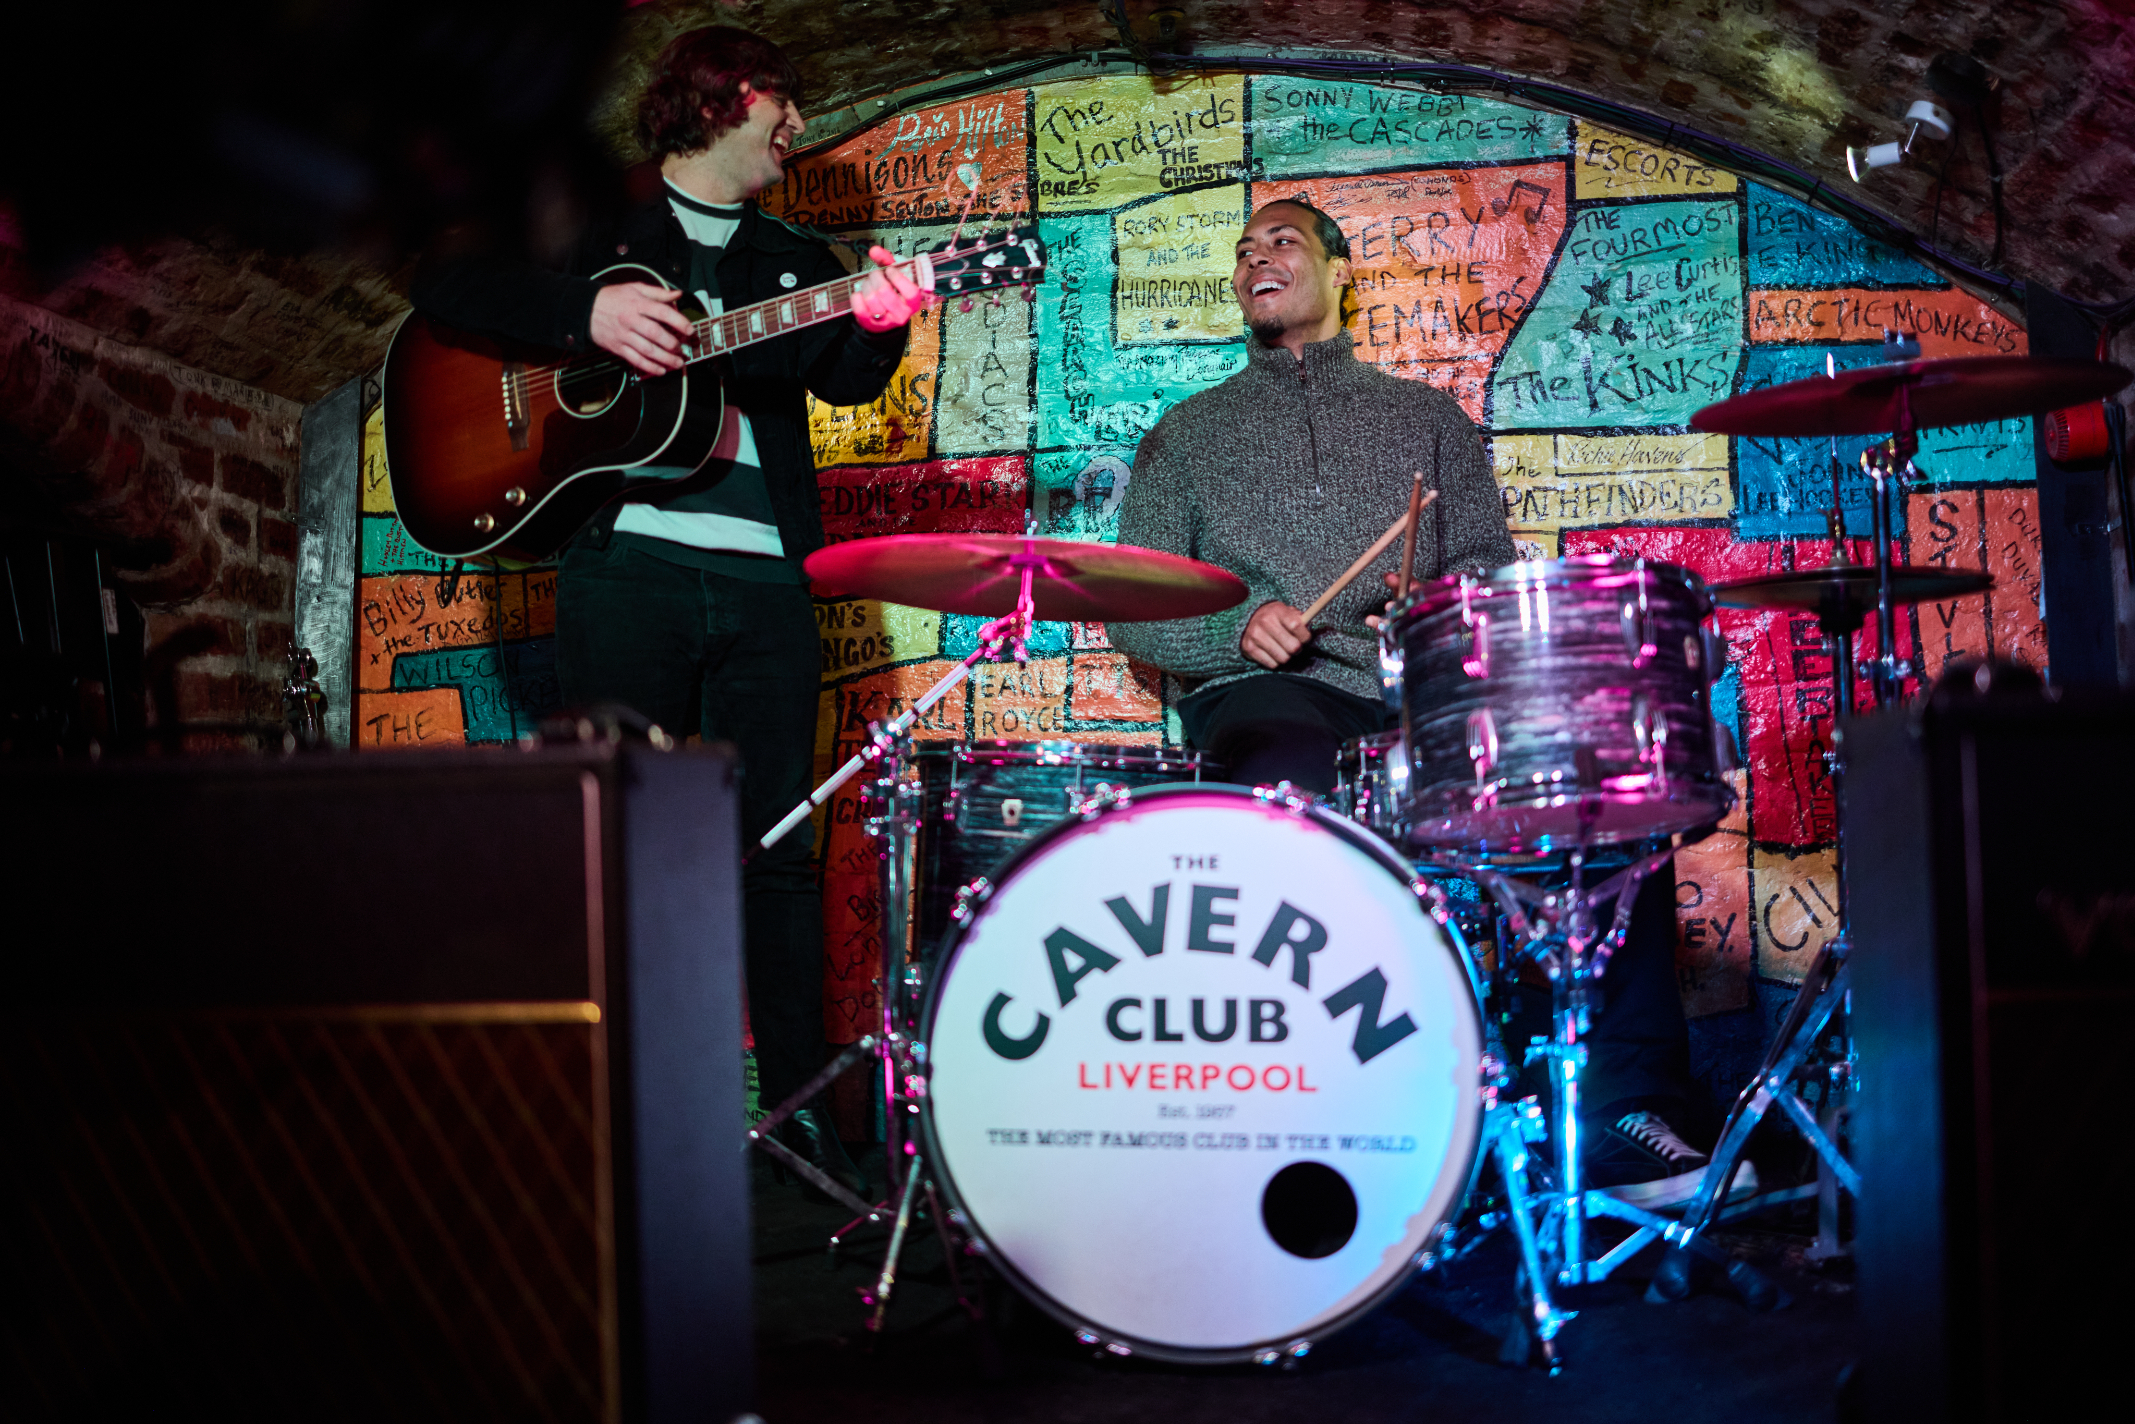 Musicians performing at The Cavern Club in Liverpool, with iconic logo drum set in the foreground